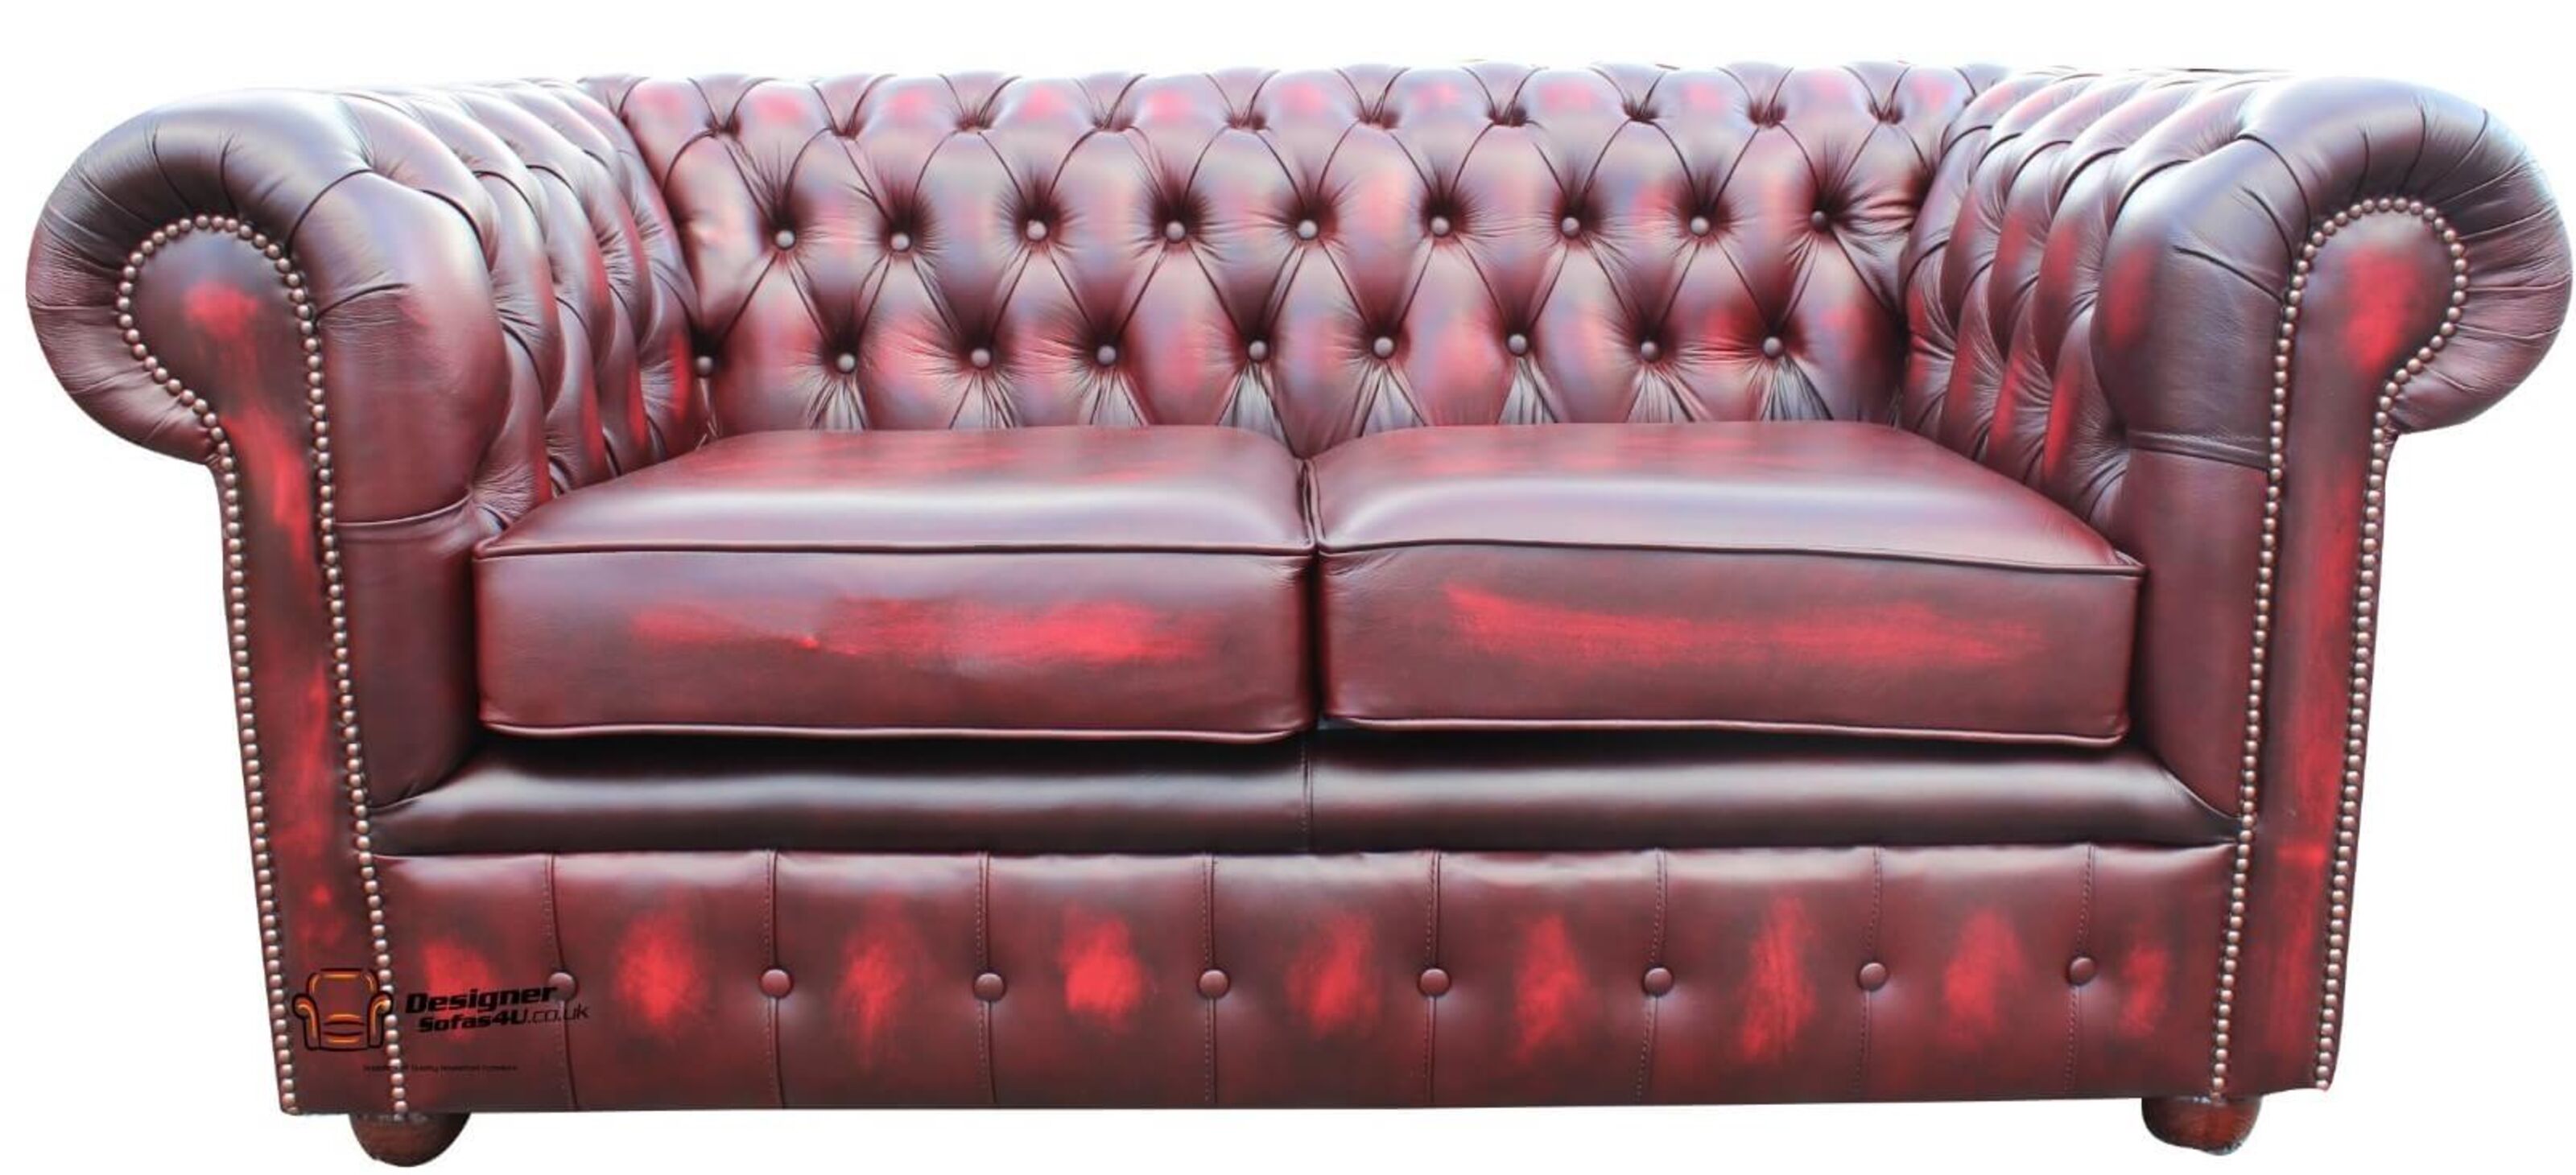 Deciphering Authenticity Understanding the True Essence of a Chesterfield Sofa  %Post Title